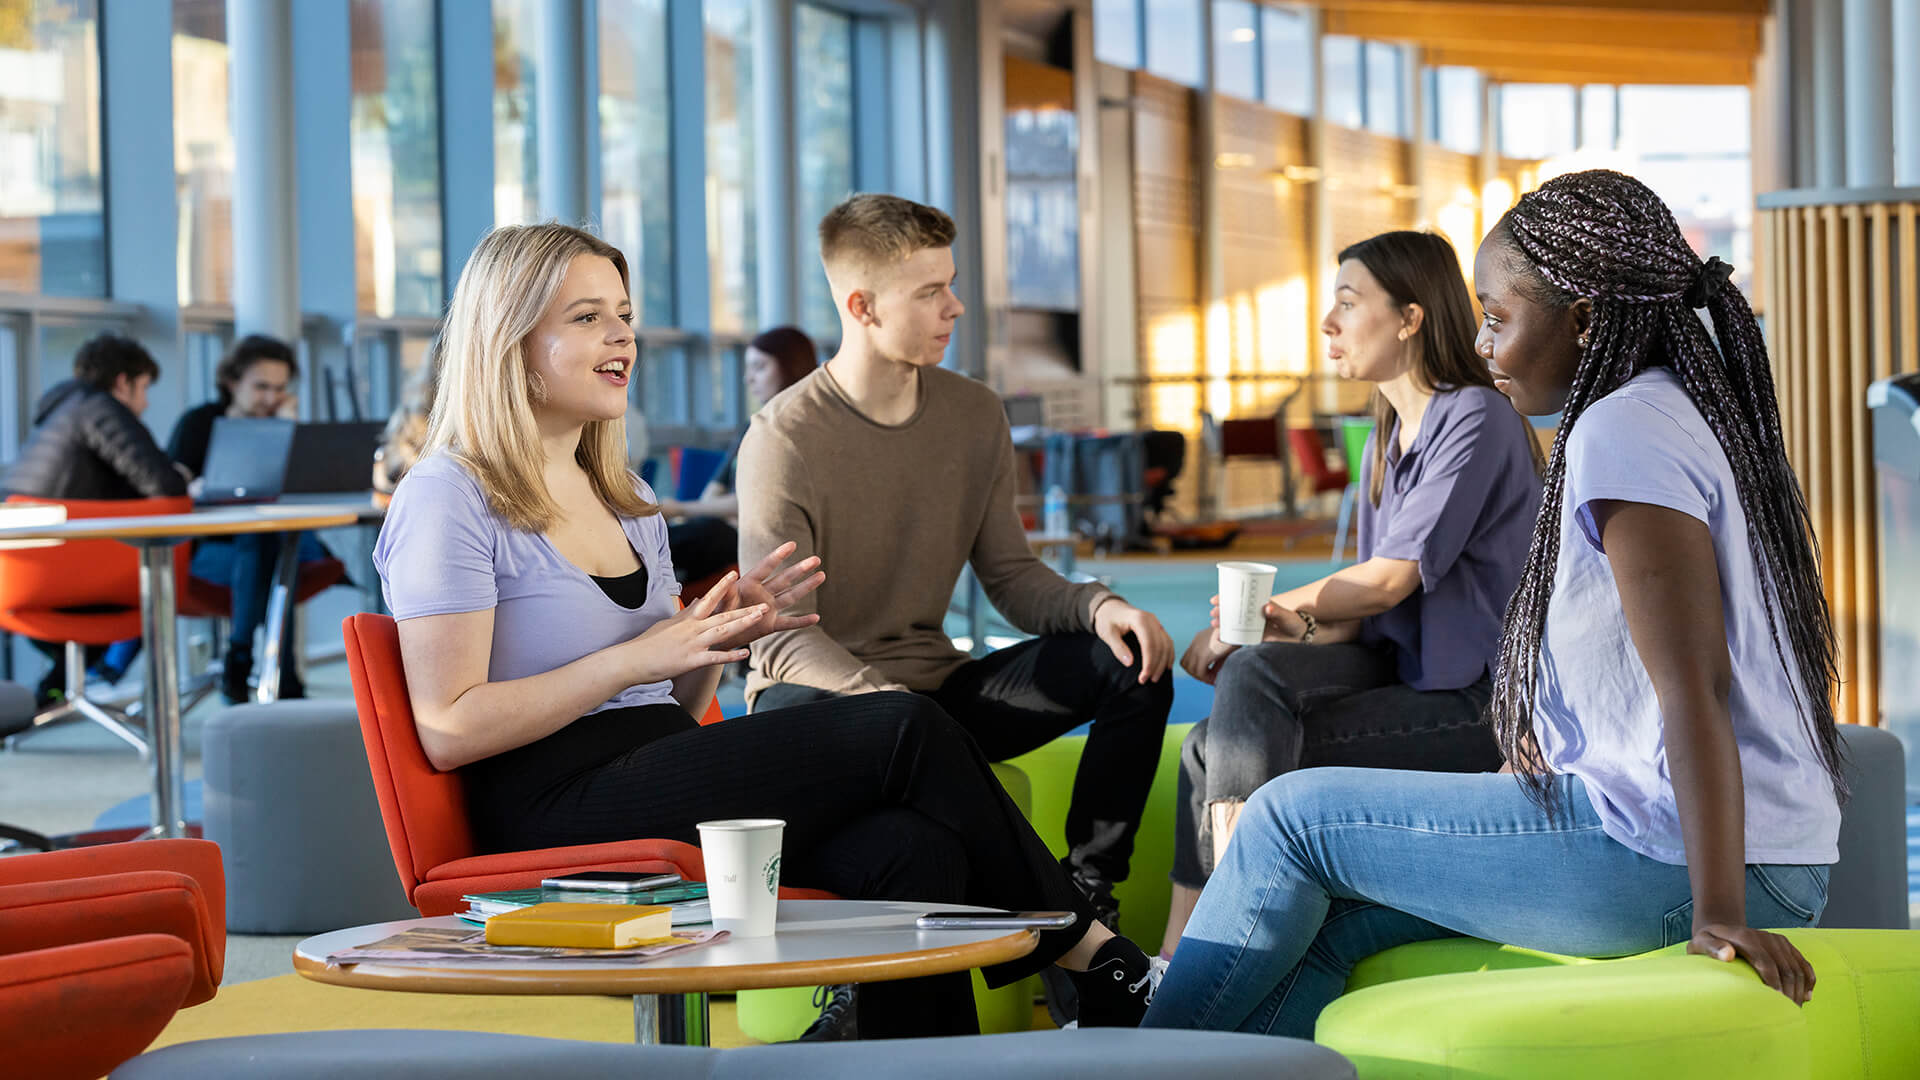 Four students sit together round a small table in the Hub and discuss their studies.